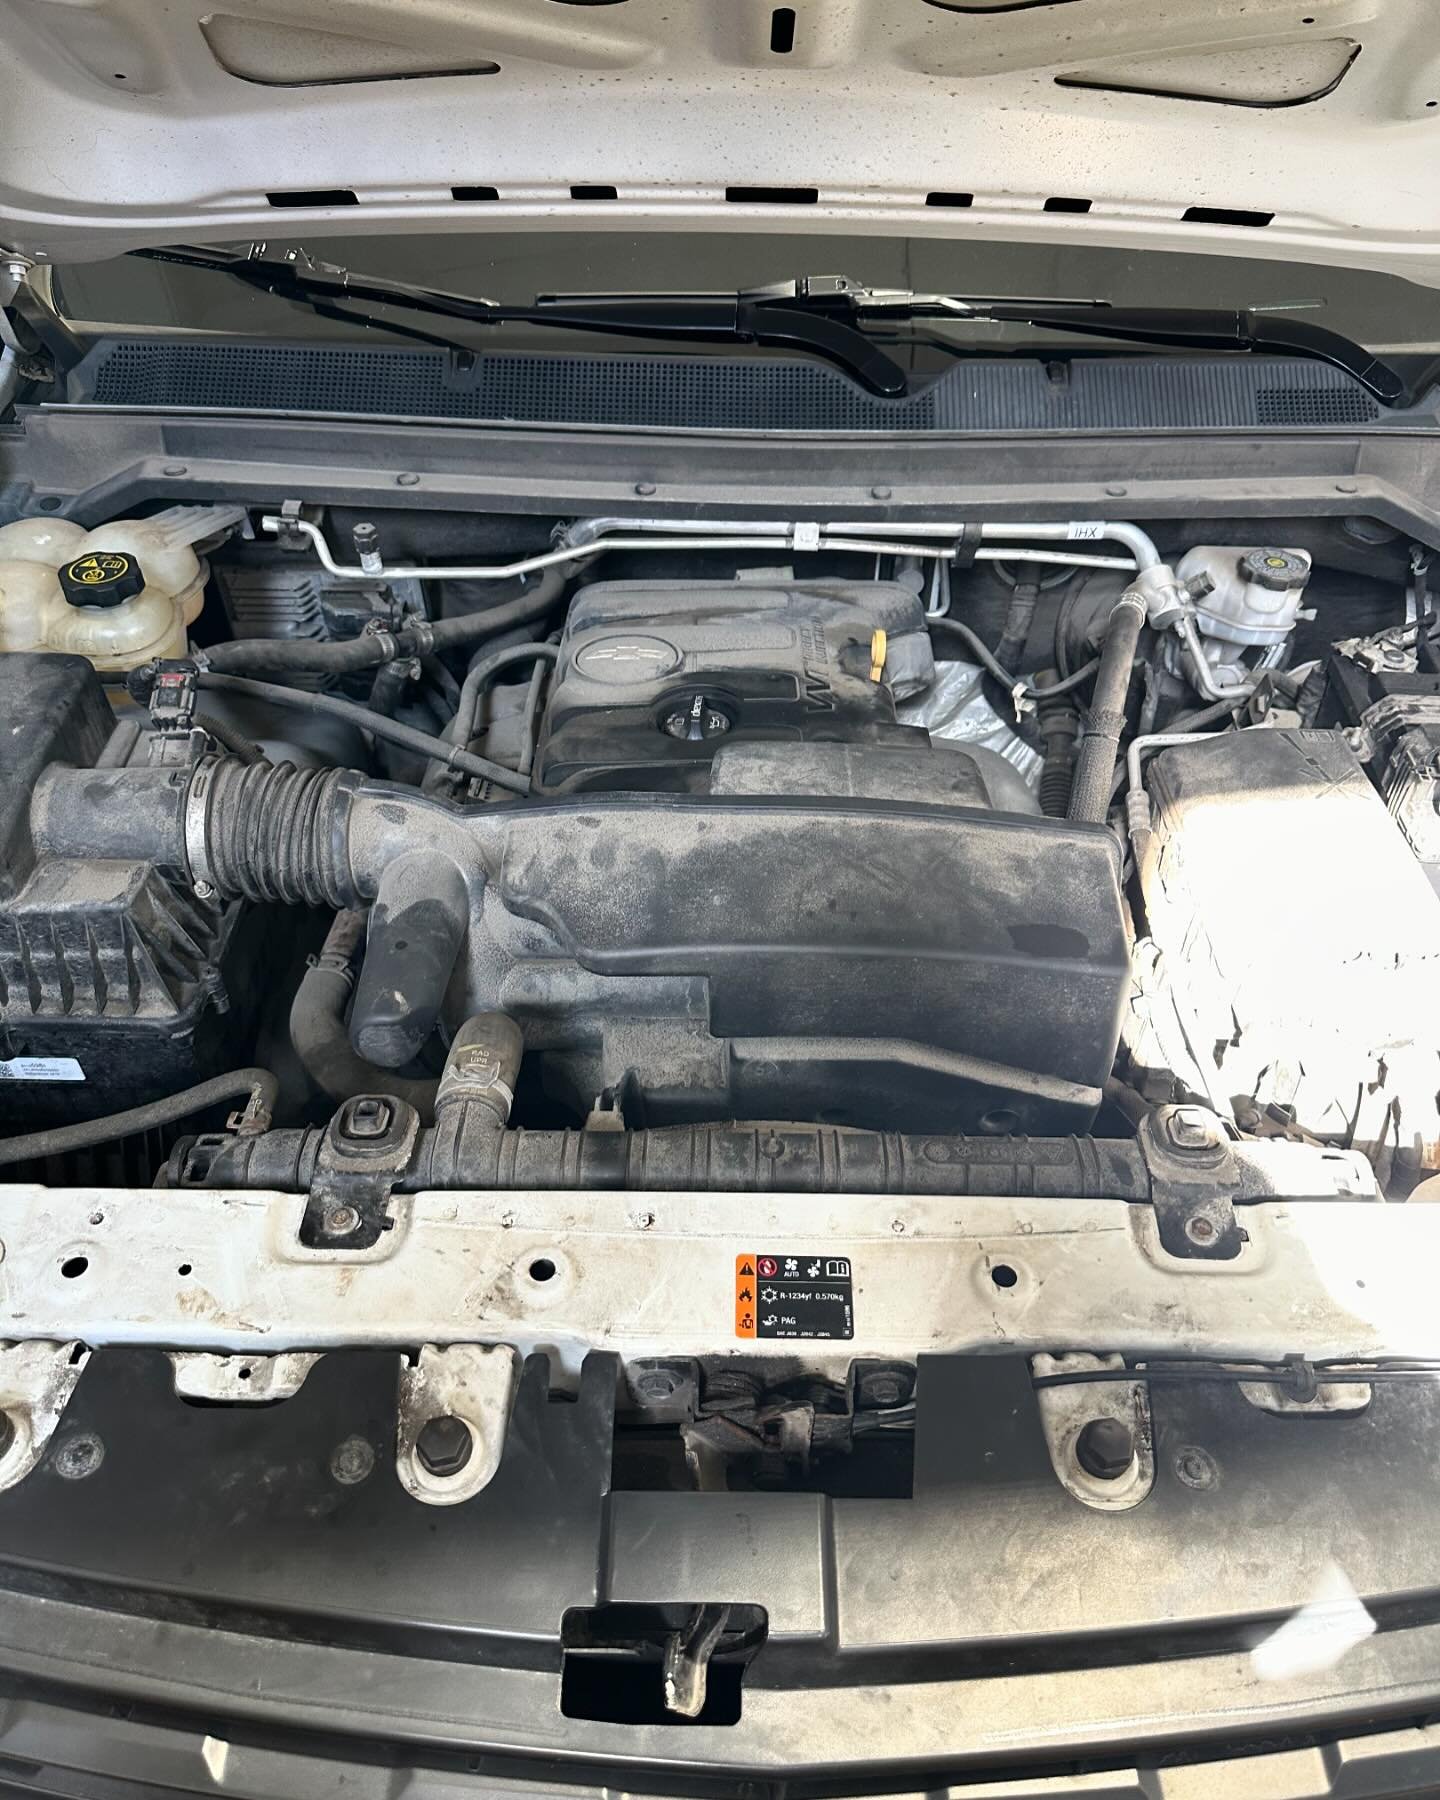 Water pump replacement on a 2018 Chevy Colorado 🤩